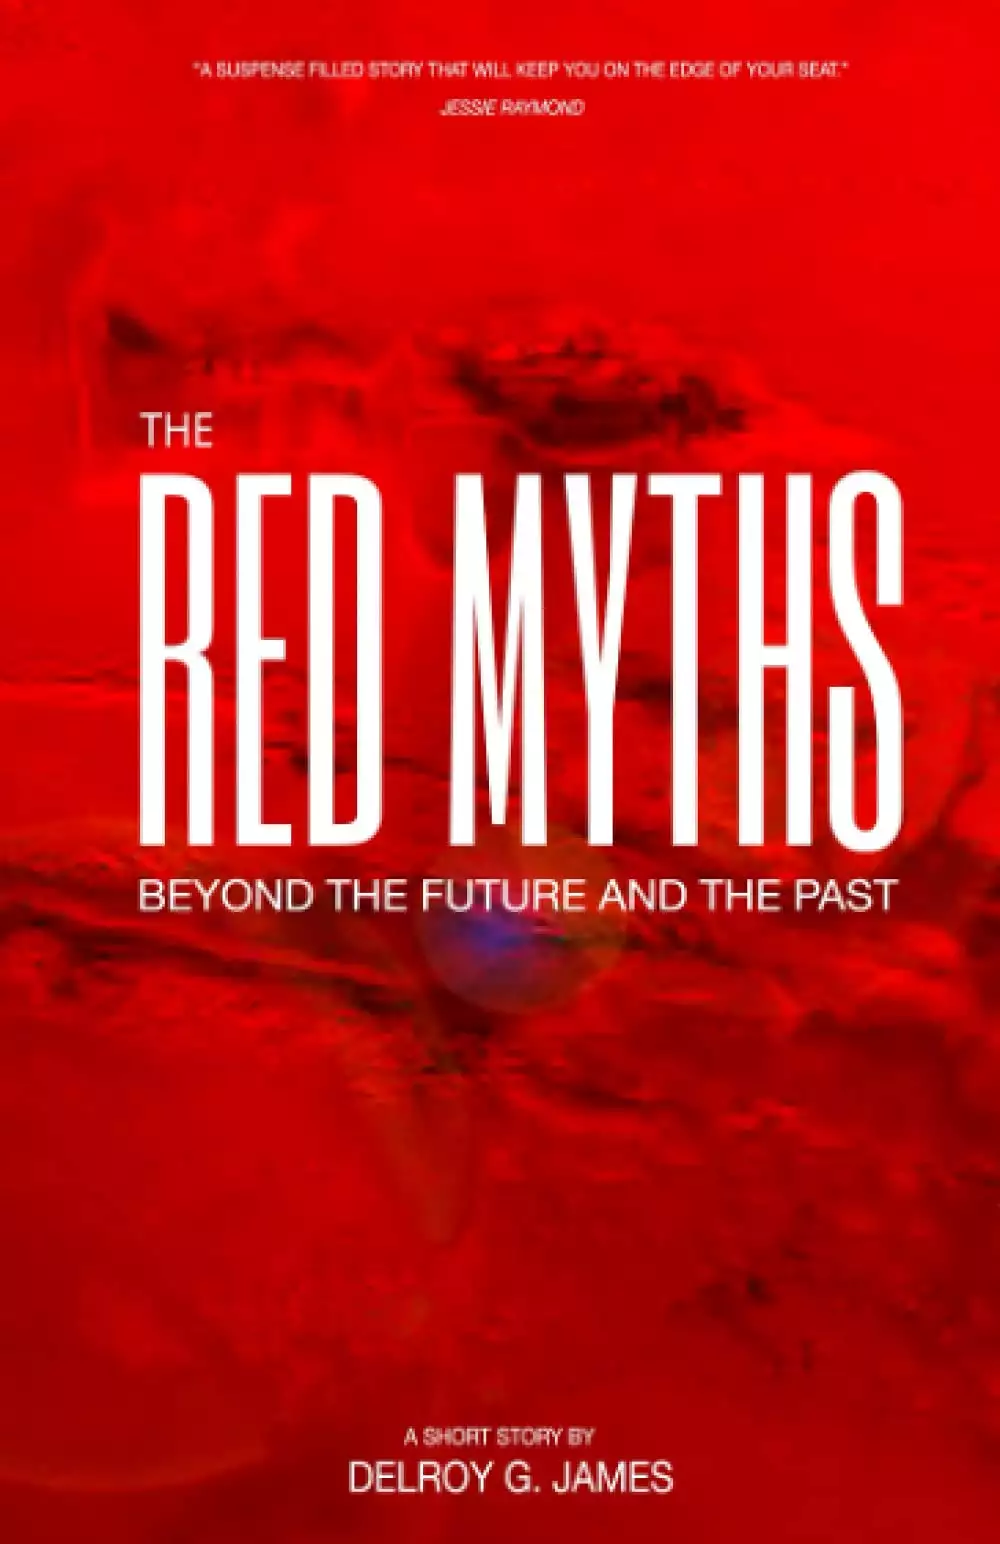 The Red Myths: Beyond the Future and the Past